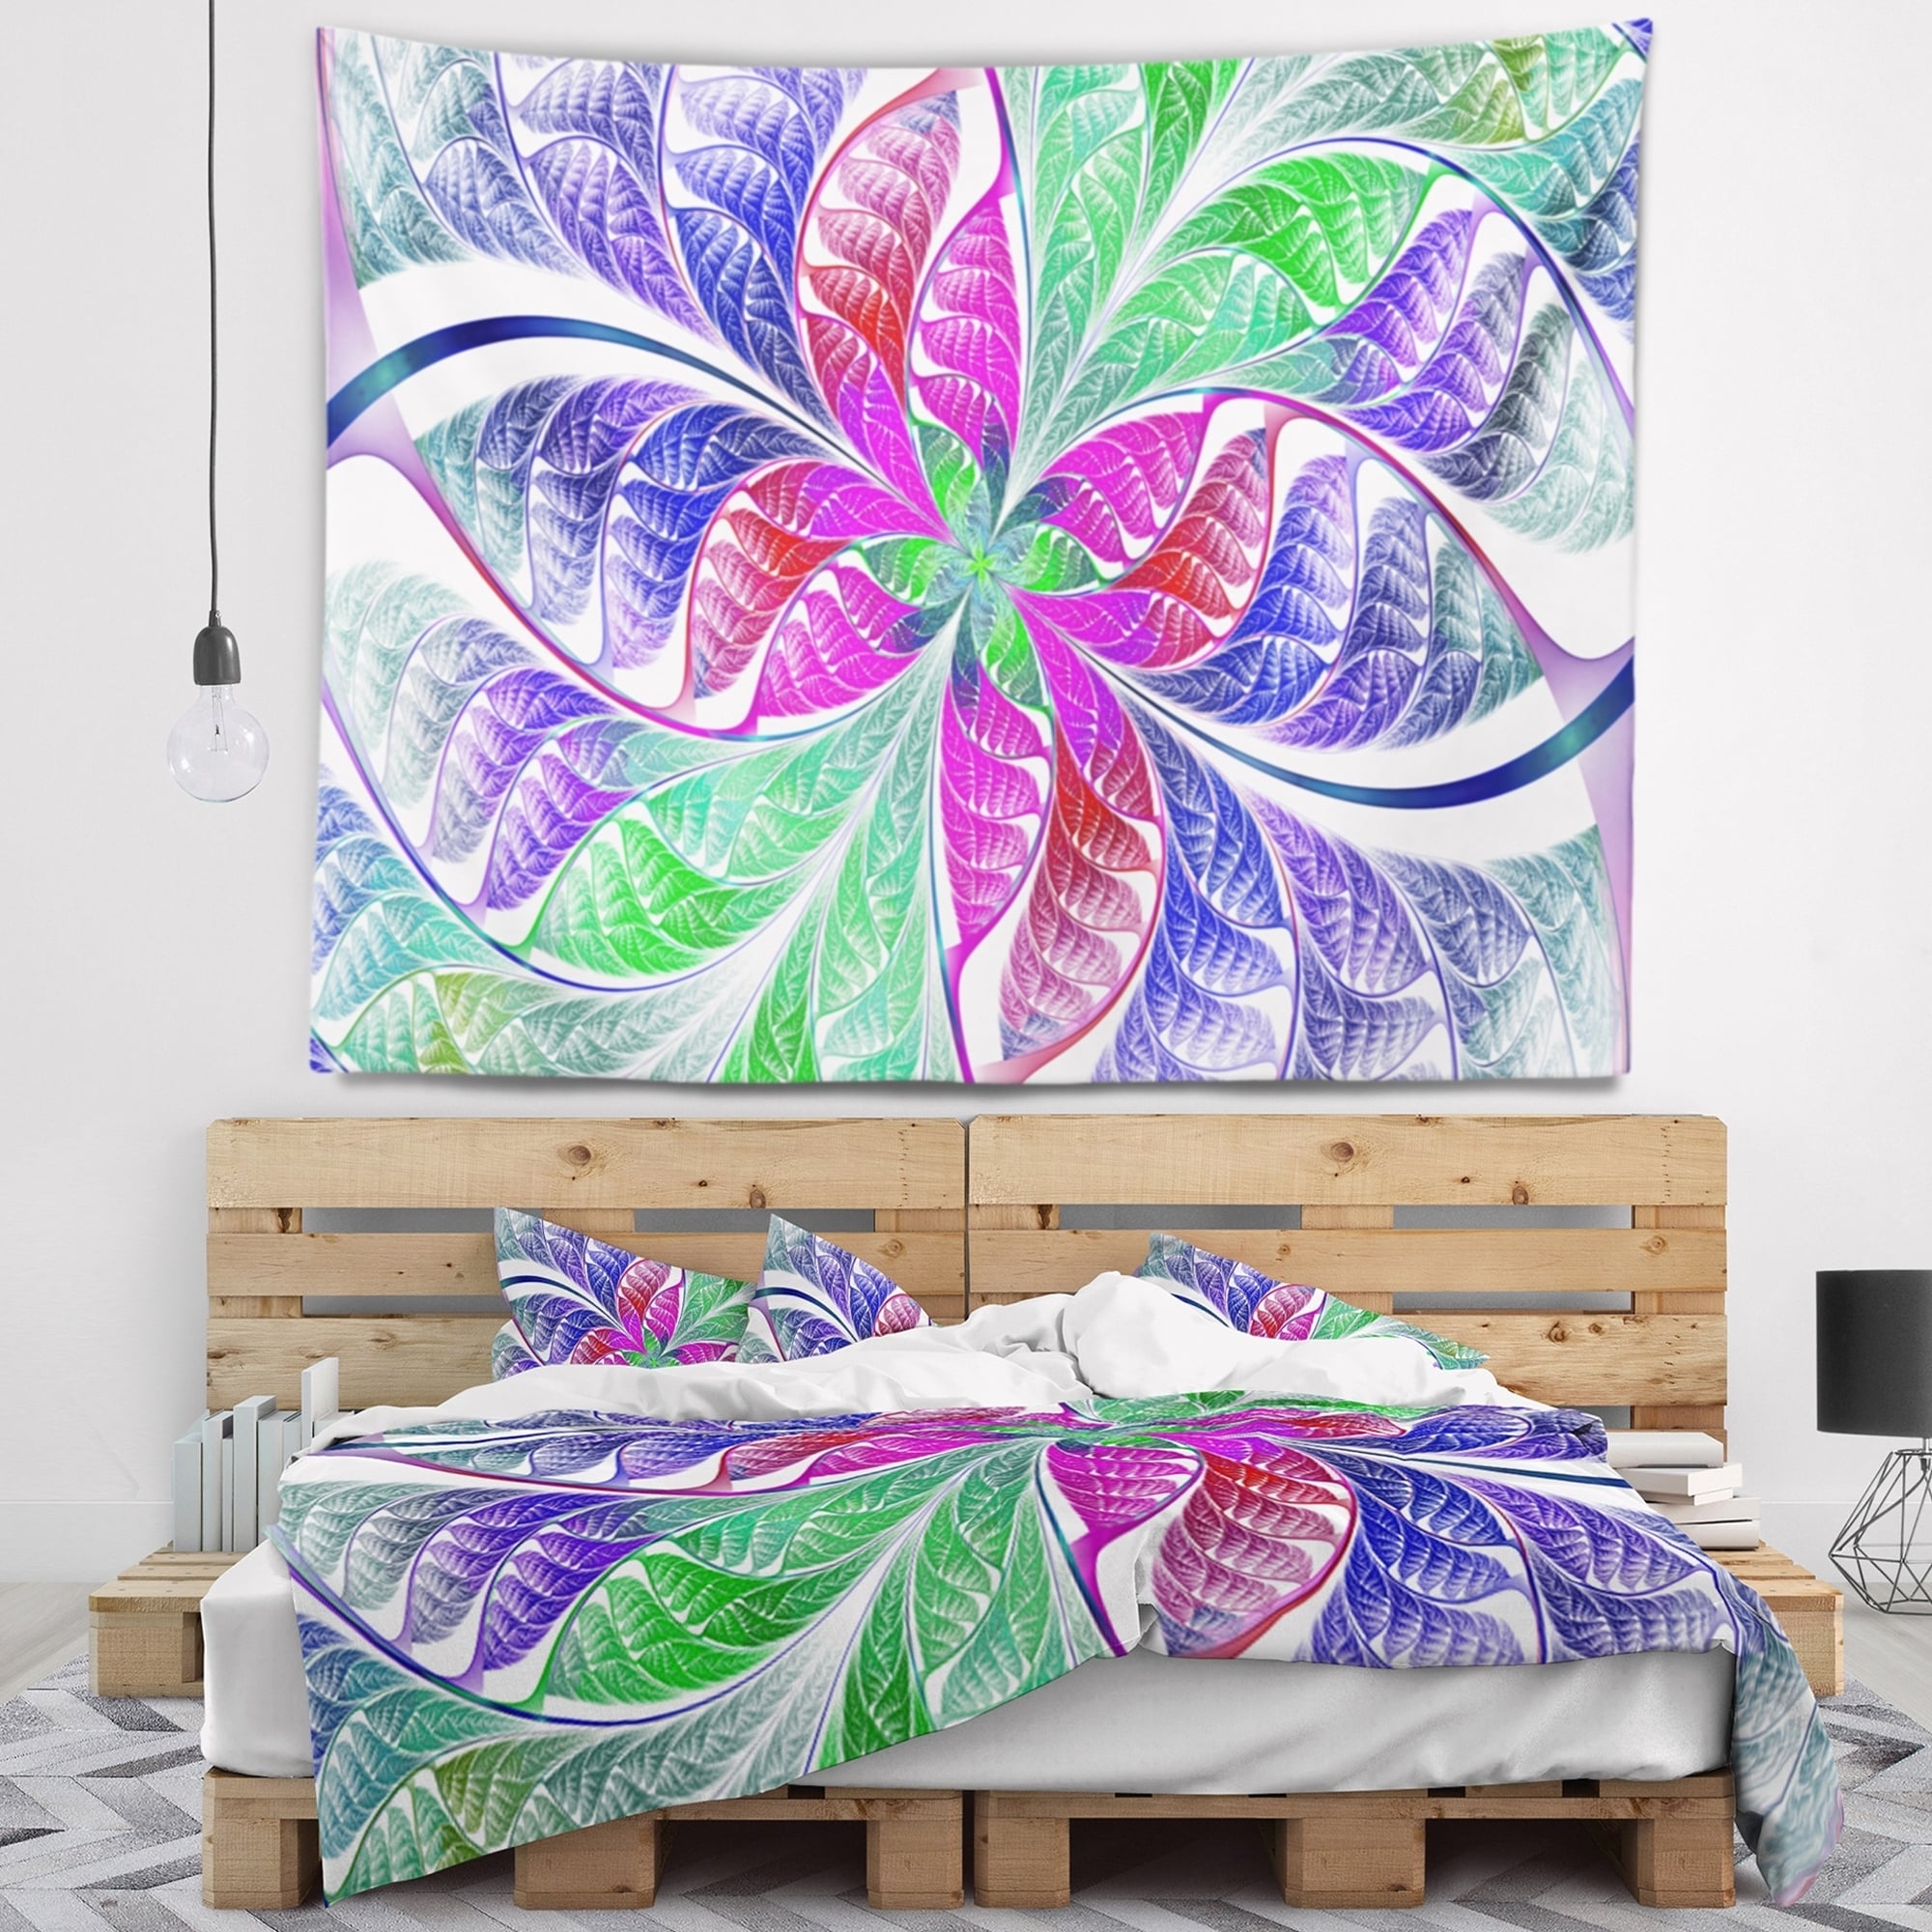 Designart 'Flower like Fractal Stained Glass' Abstract Wall Tapestry